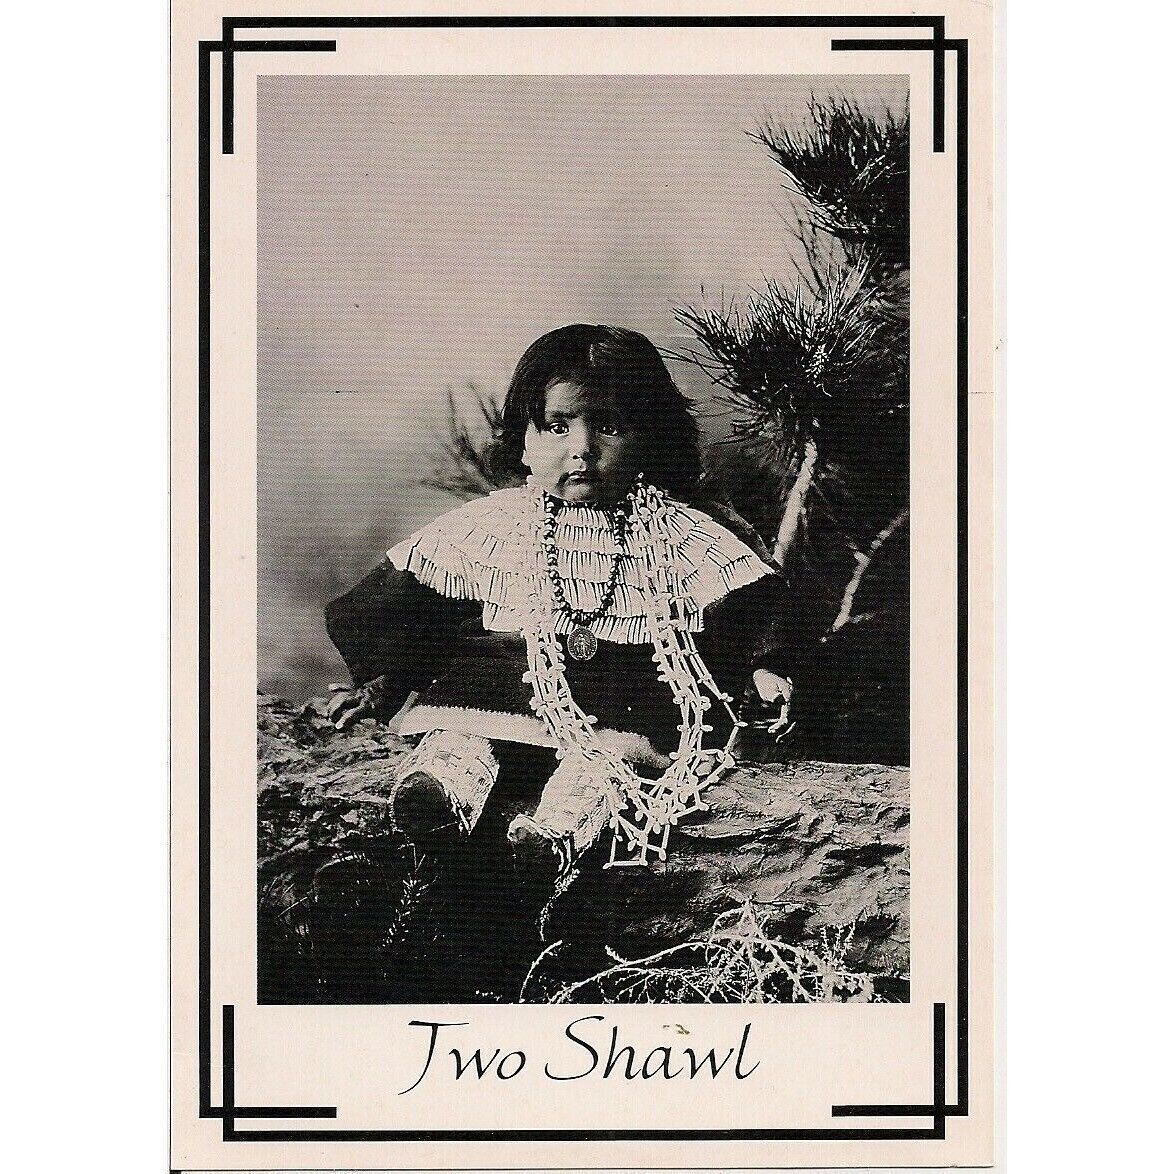 Primary image for Two Shawl Native American Child Of The Brule Sioux Nation Postcard